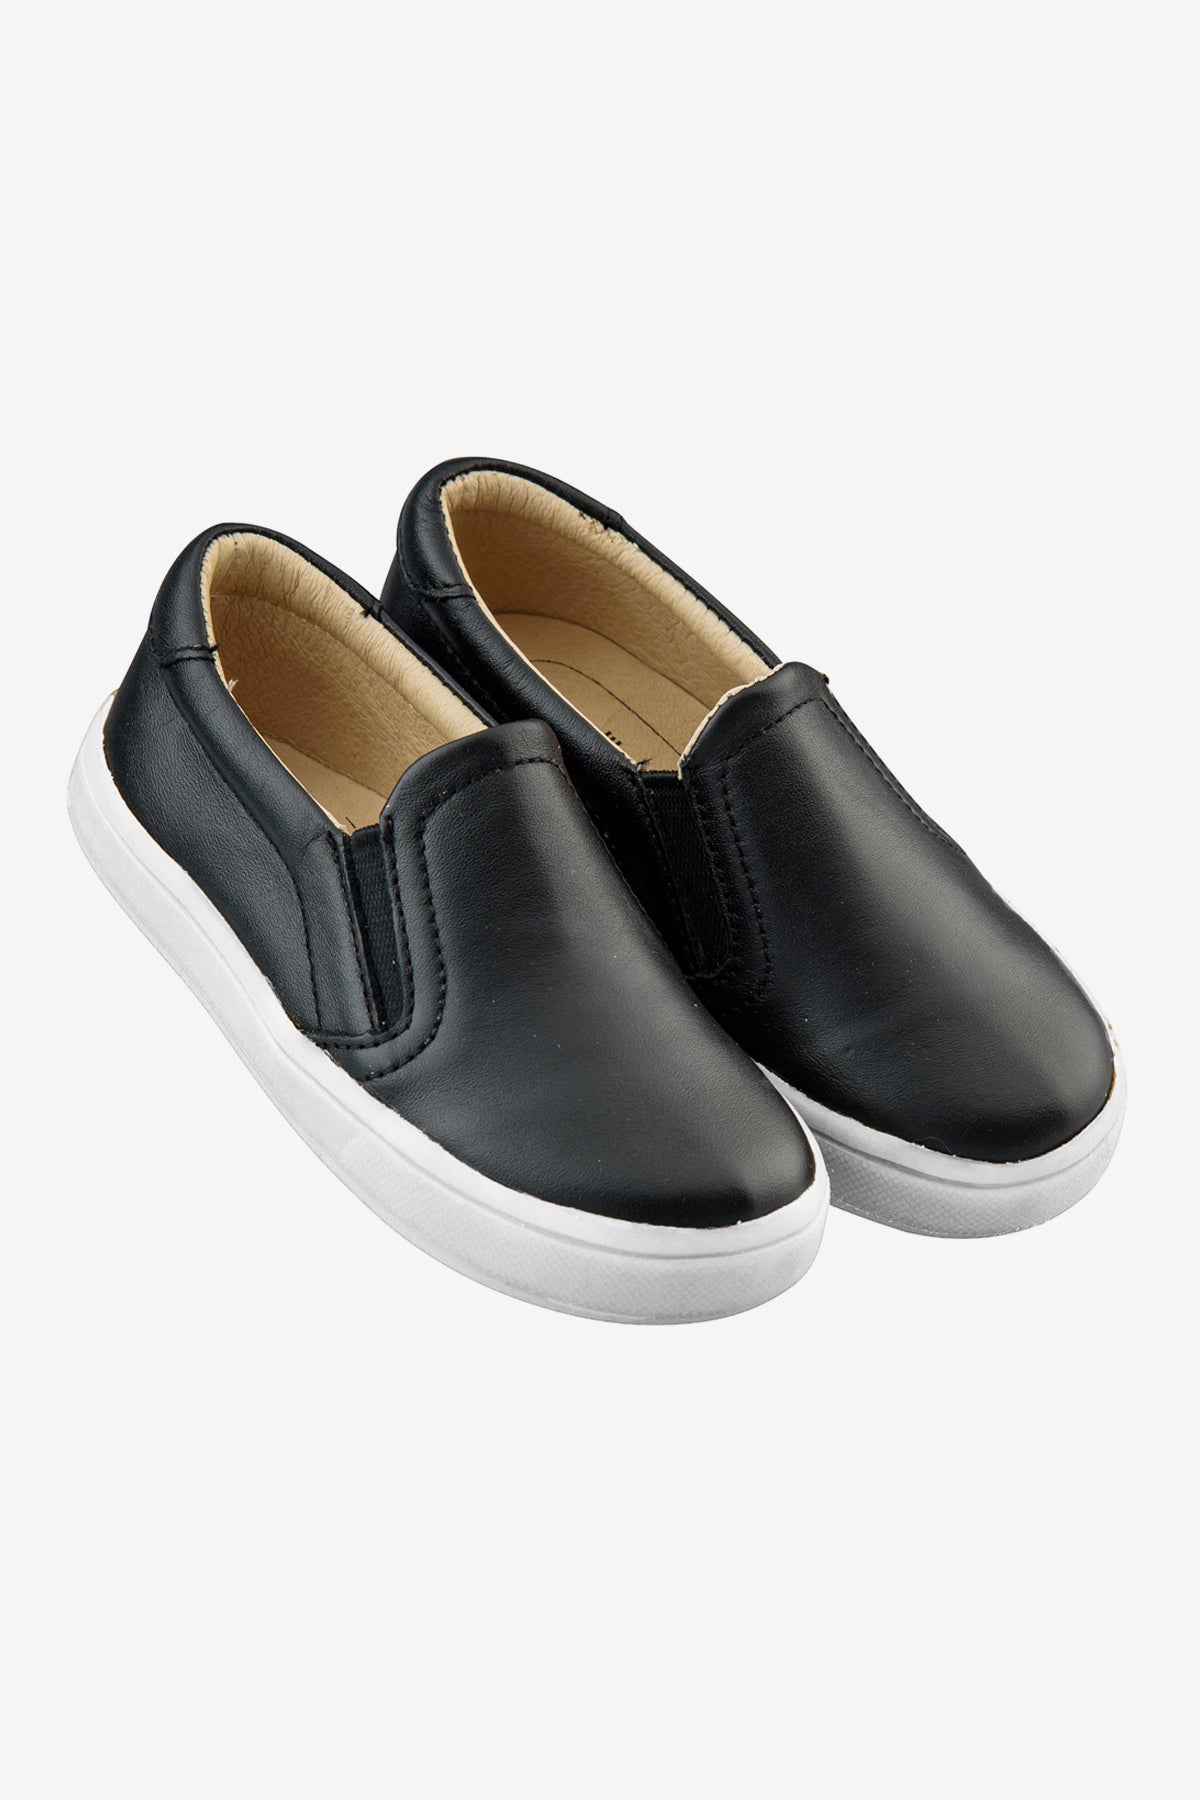 black rubber soled shoes